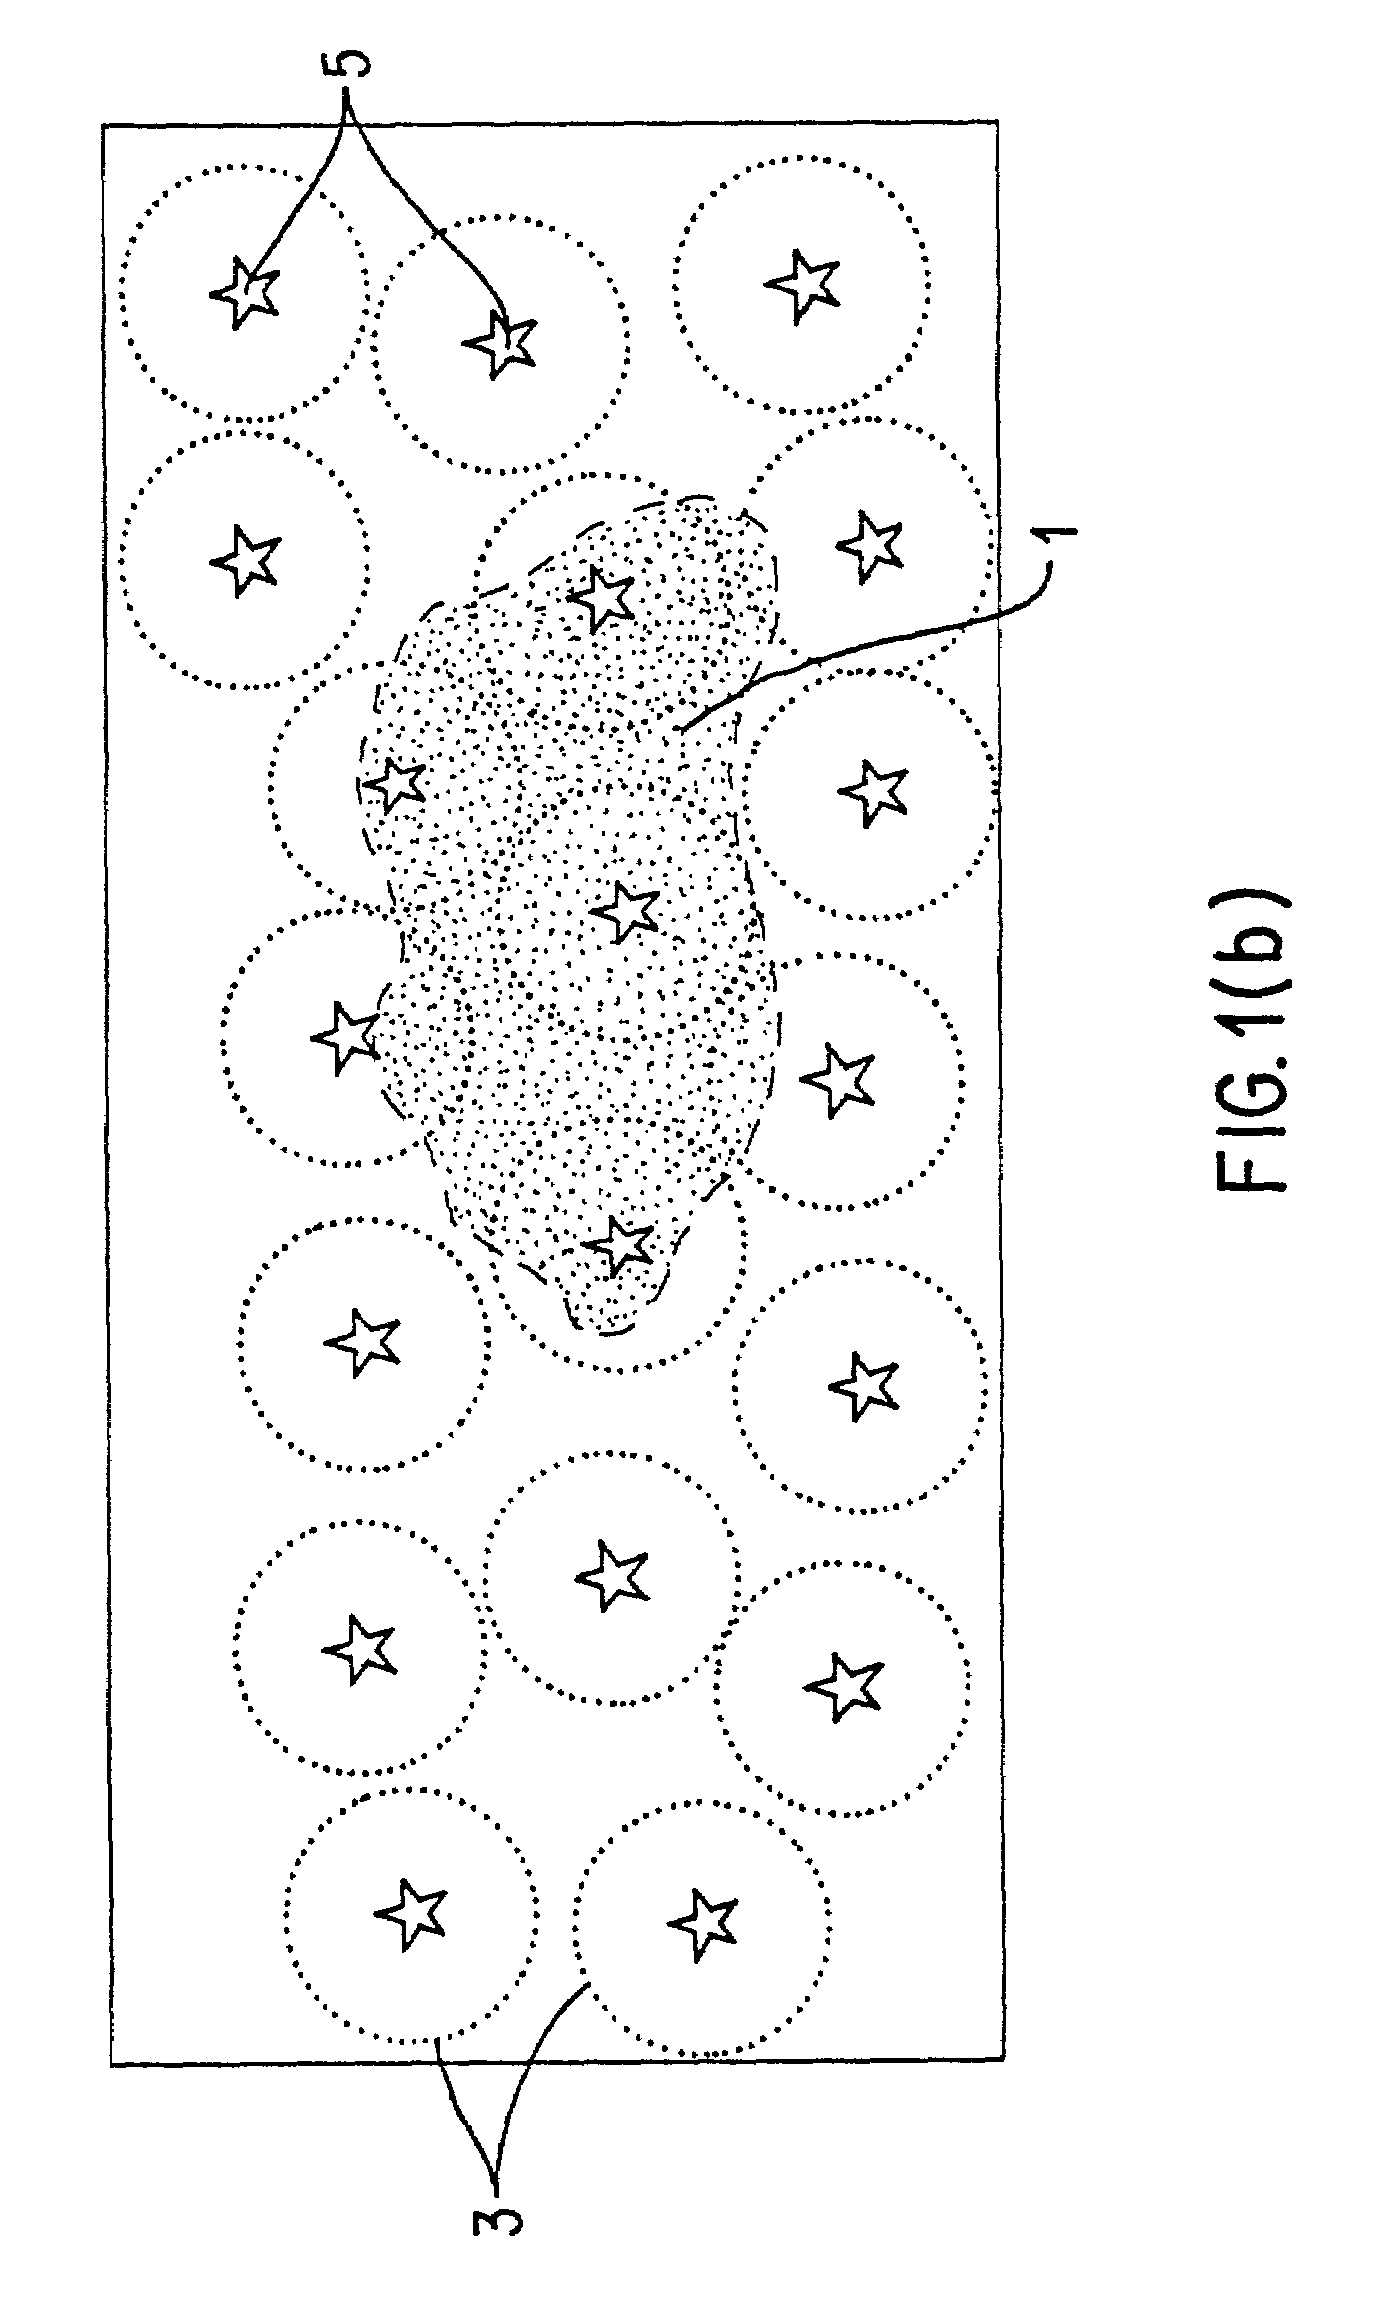 Method for selecting an optimally diverse library of small molecules based on validated molecular structural descriptors